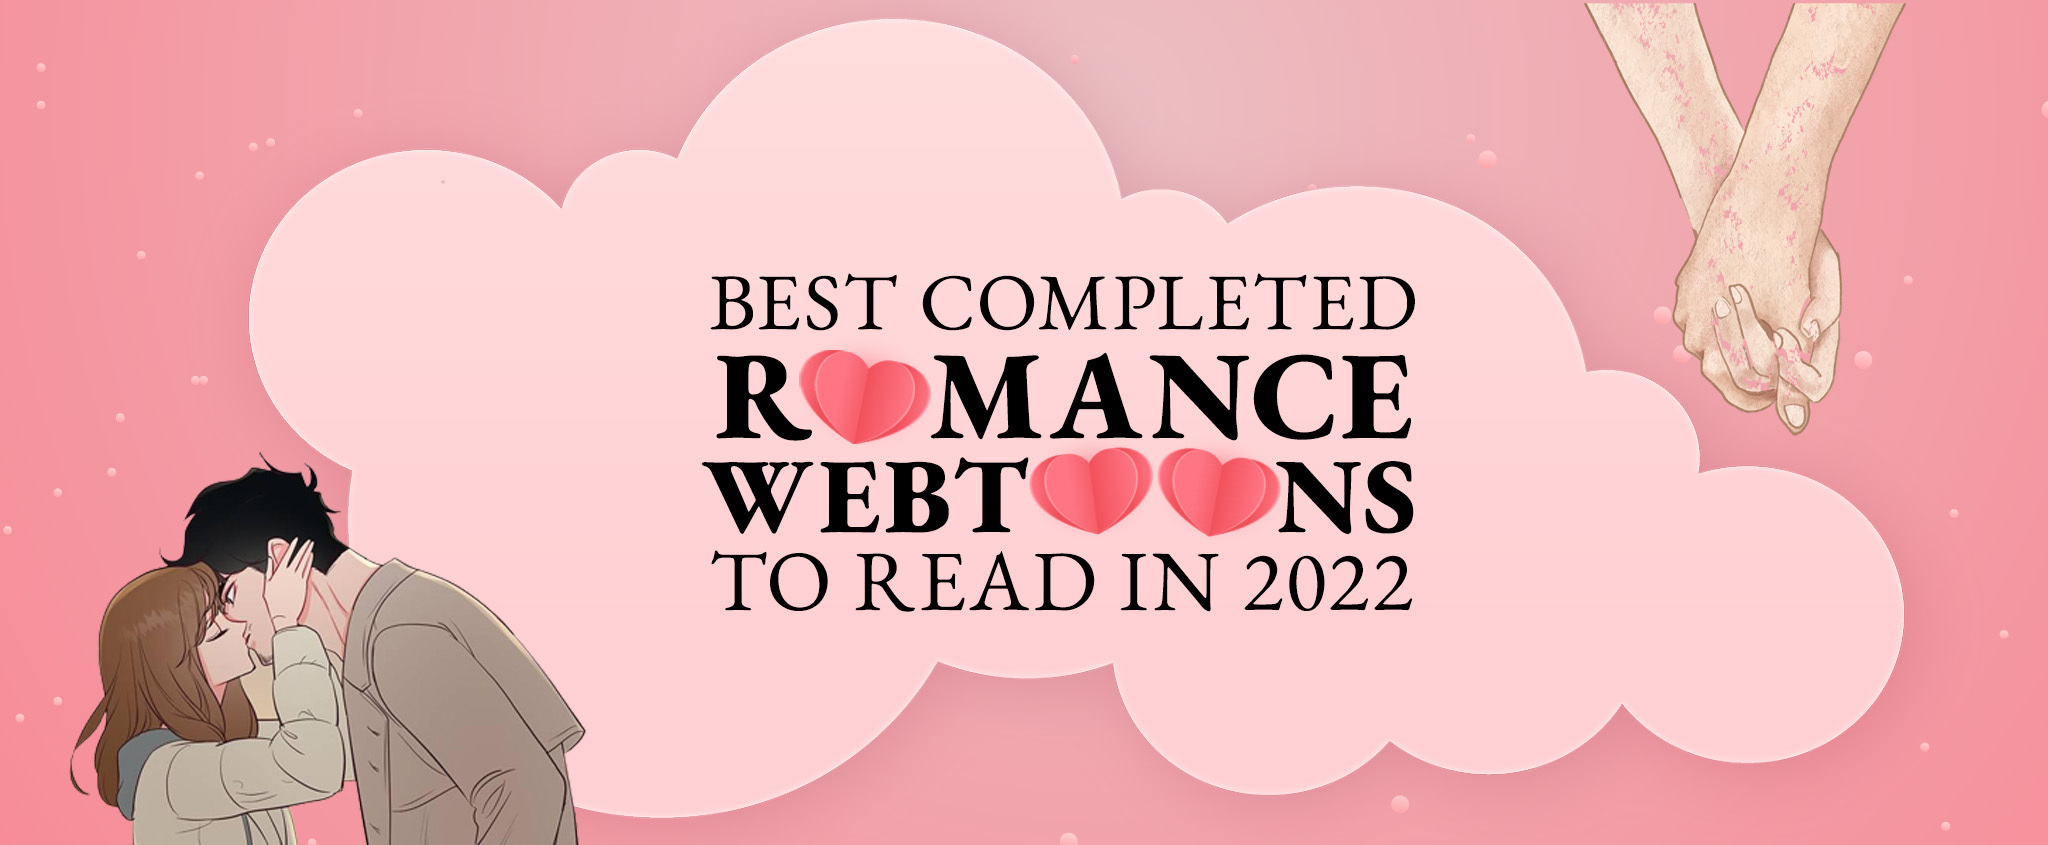 Best Completed Romance Webtoons to Read in 2022